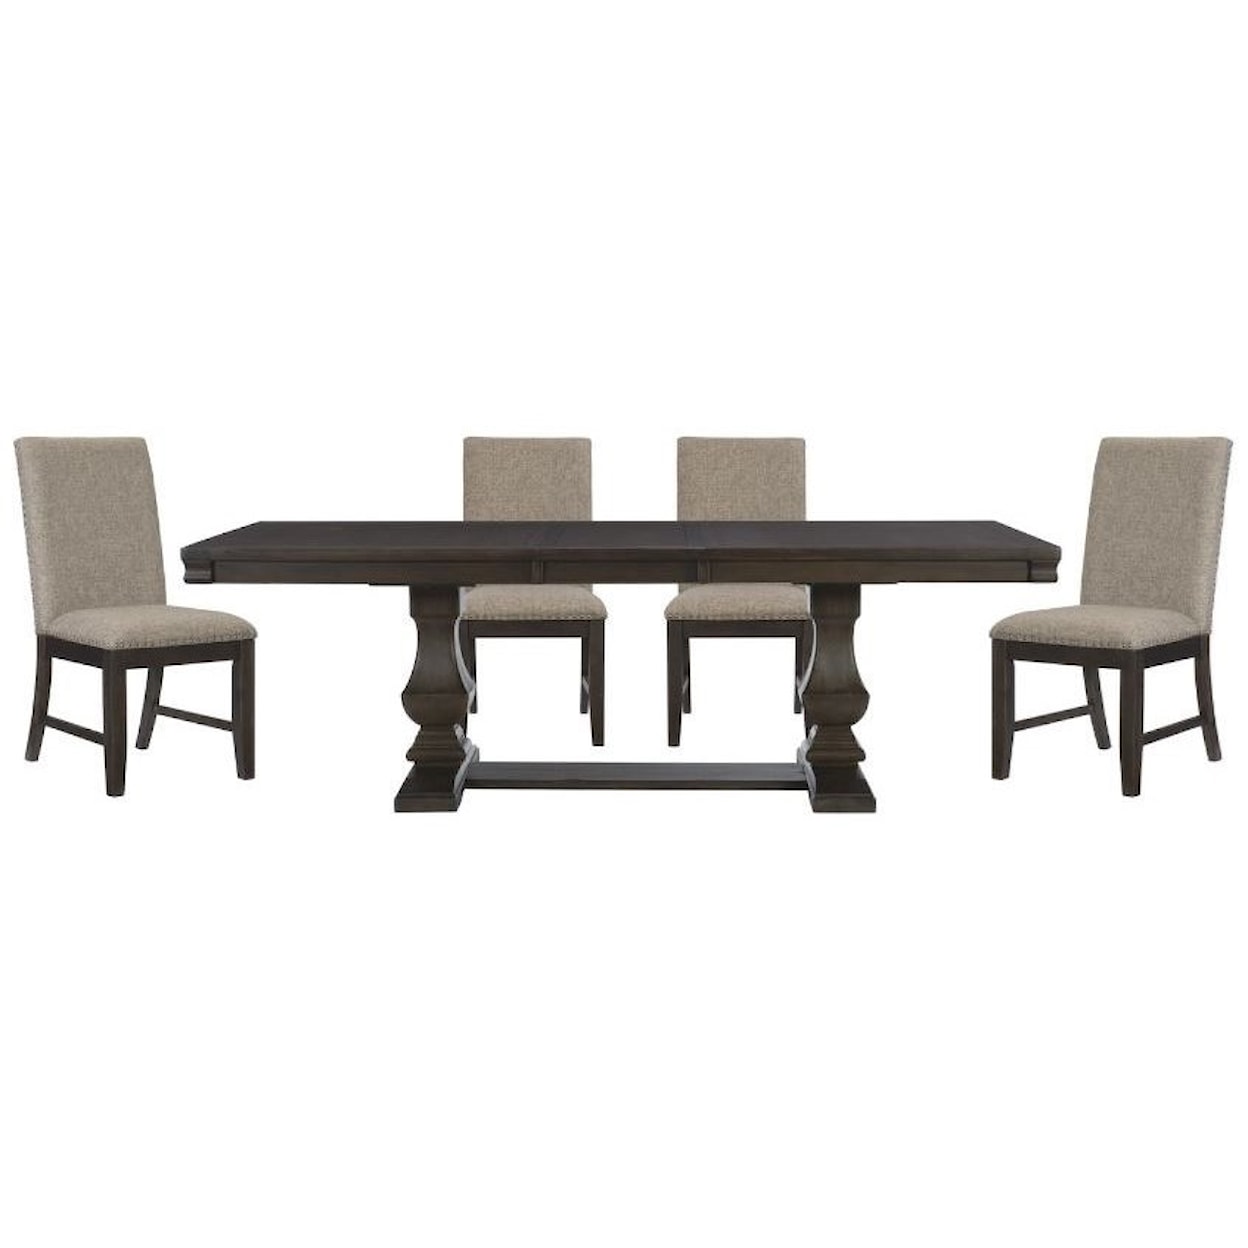 Homelegance Furniture Southlake 5-Piece Table and Chair Set